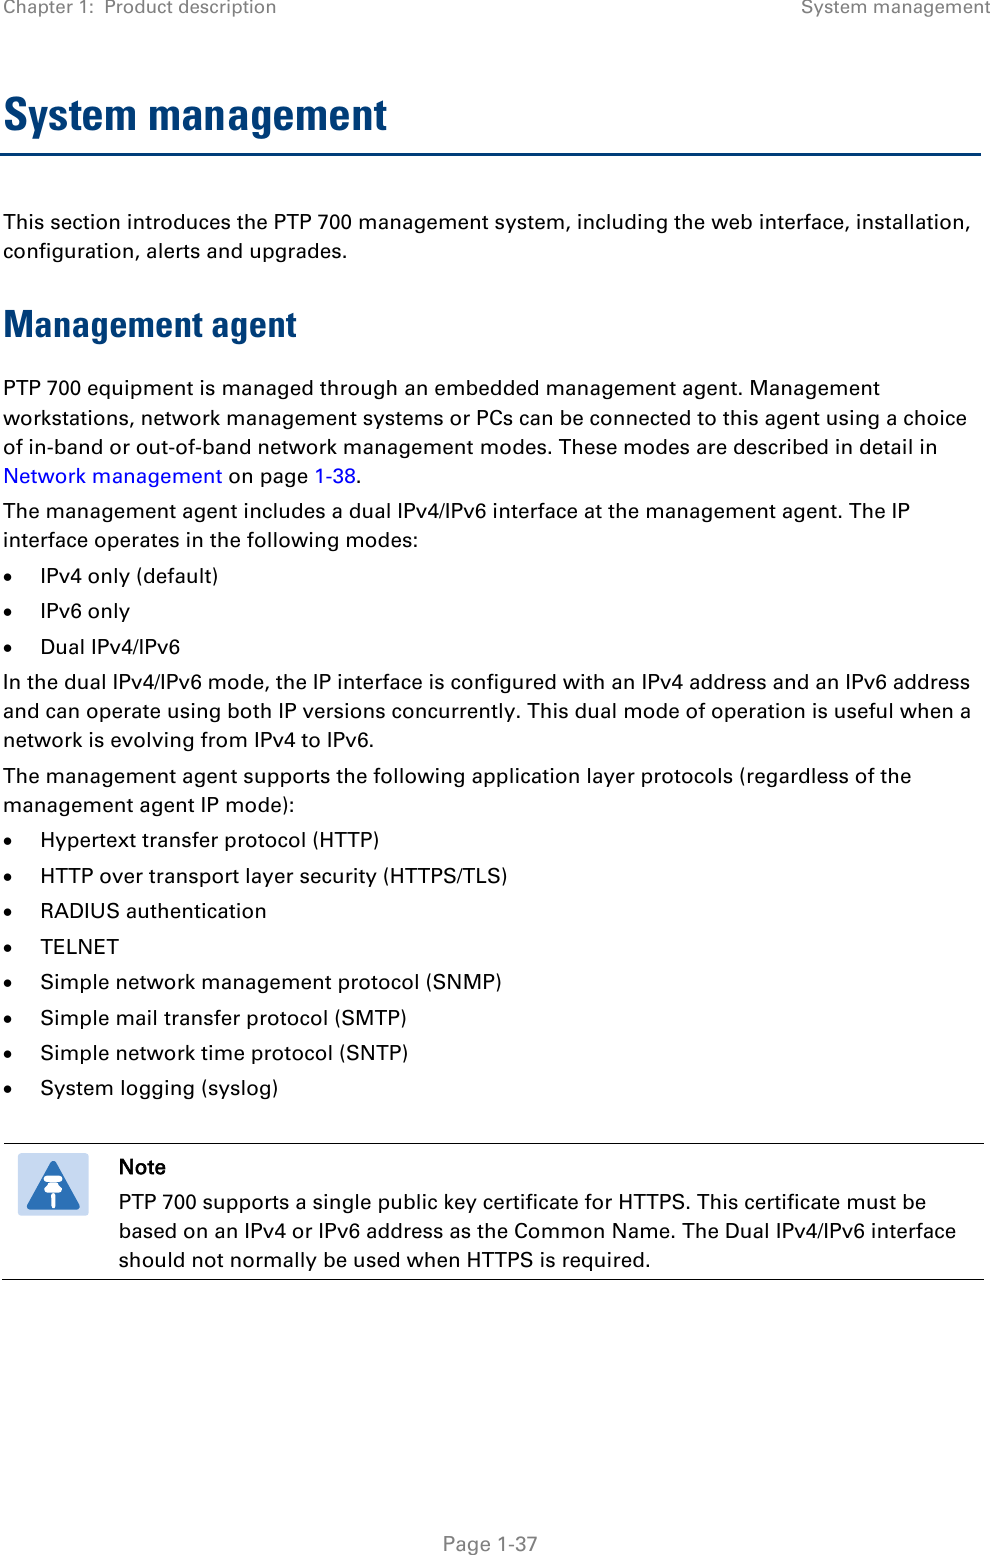 Chapter 1:  Product description System management  System management  This section introduces the PTP 700 management system, including the web interface, installation, configuration, alerts and upgrades. Management agent PTP 700 equipment is managed through an embedded management agent. Management workstations, network management systems or PCs can be connected to this agent using a choice of in-band or out-of-band network management modes. These modes are described in detail in Network management on page 1-38. The management agent includes a dual IPv4/IPv6 interface at the management agent. The IP interface operates in the following modes: • IPv4 only (default) • IPv6 only • Dual IPv4/IPv6 In the dual IPv4/IPv6 mode, the IP interface is configured with an IPv4 address and an IPv6 address and can operate using both IP versions concurrently. This dual mode of operation is useful when a network is evolving from IPv4 to IPv6. The management agent supports the following application layer protocols (regardless of the management agent IP mode): • Hypertext transfer protocol (HTTP) • HTTP over transport layer security (HTTPS/TLS) • RADIUS authentication • TELNET • Simple network management protocol (SNMP) • Simple mail transfer protocol (SMTP) • Simple network time protocol (SNTP) • System logging (syslog)   Note PTP 700 supports a single public key certificate for HTTPS. This certificate must be based on an IPv4 or IPv6 address as the Common Name. The Dual IPv4/IPv6 interface should not normally be used when HTTPS is required.      Page 1-37 